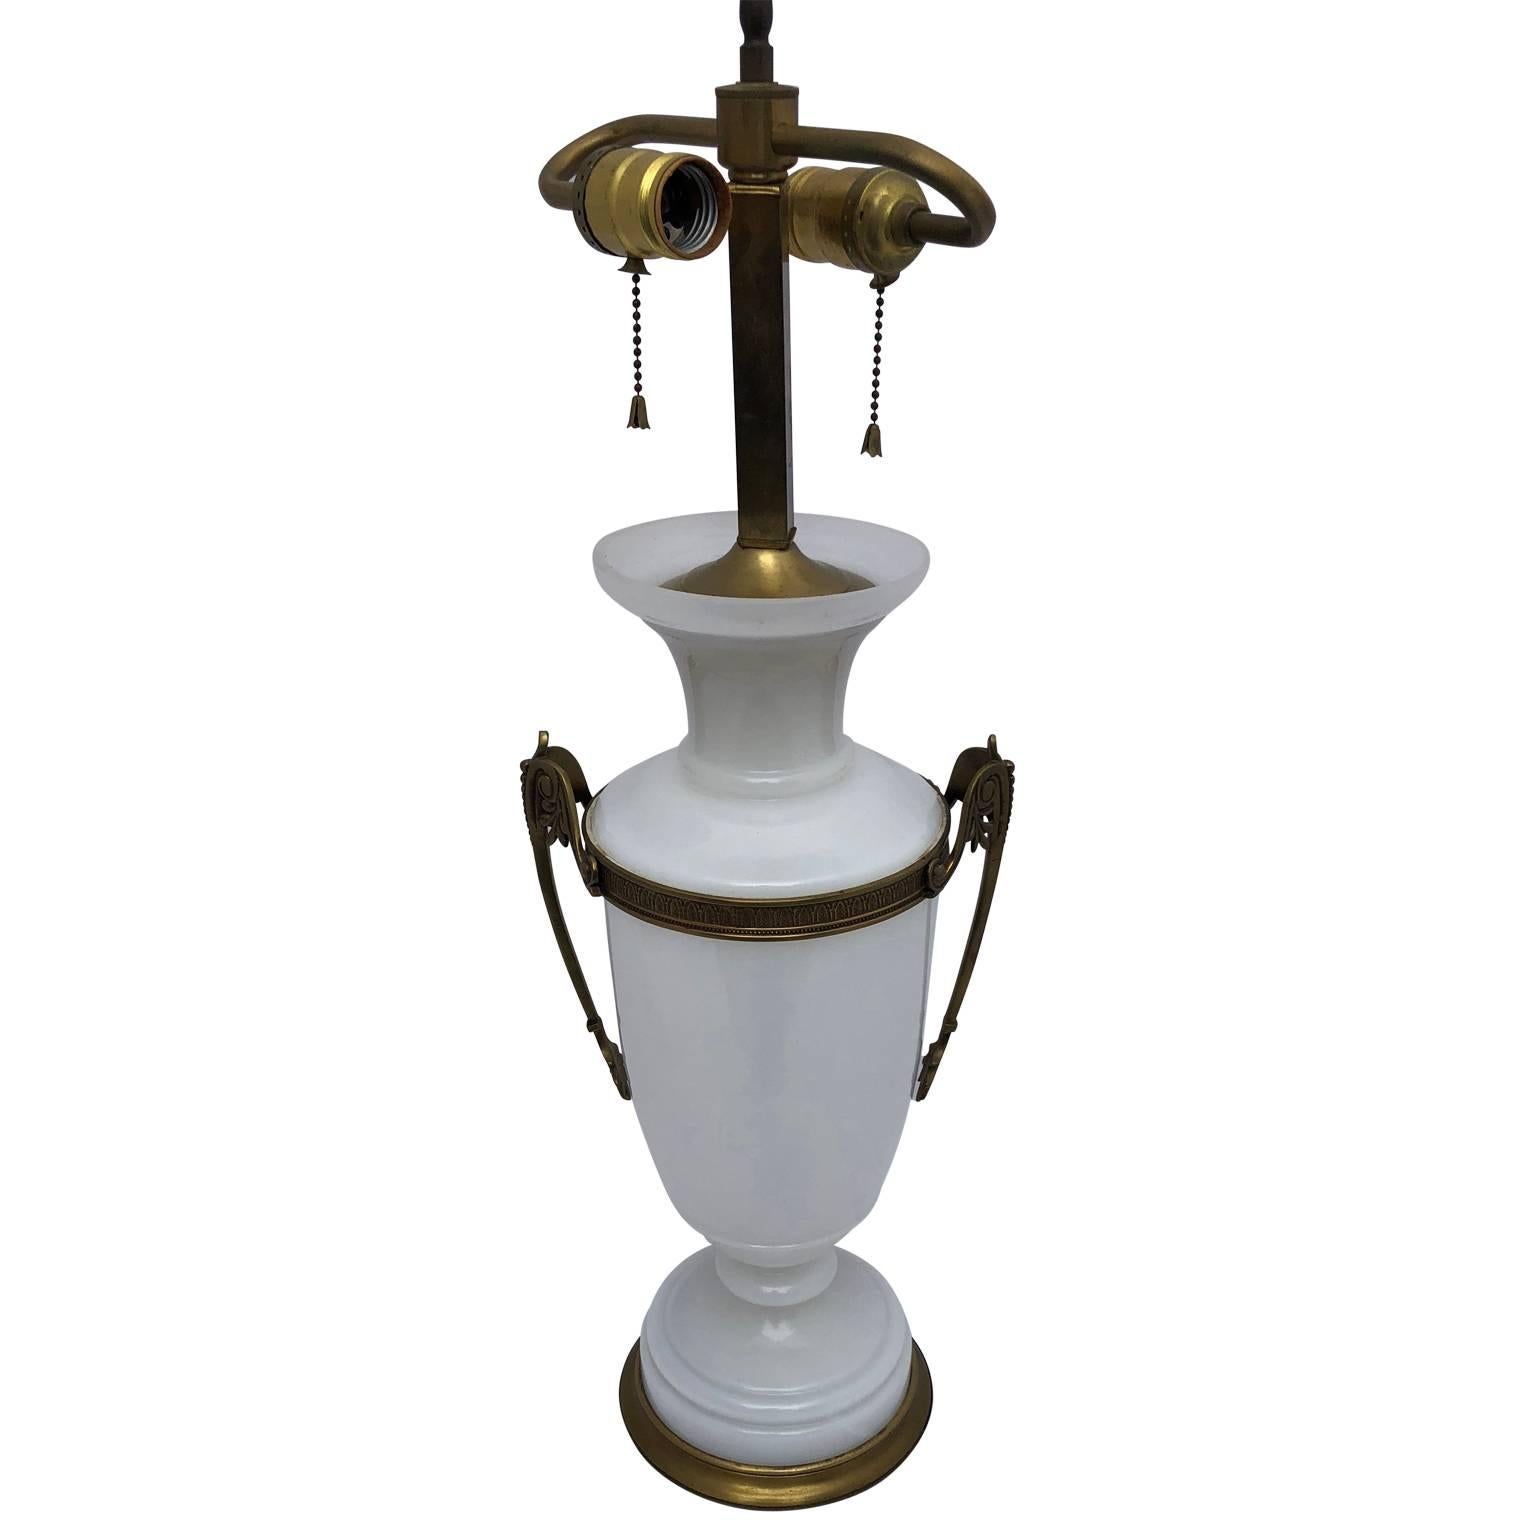 Early 20th century white opaline an bronze table lamp.